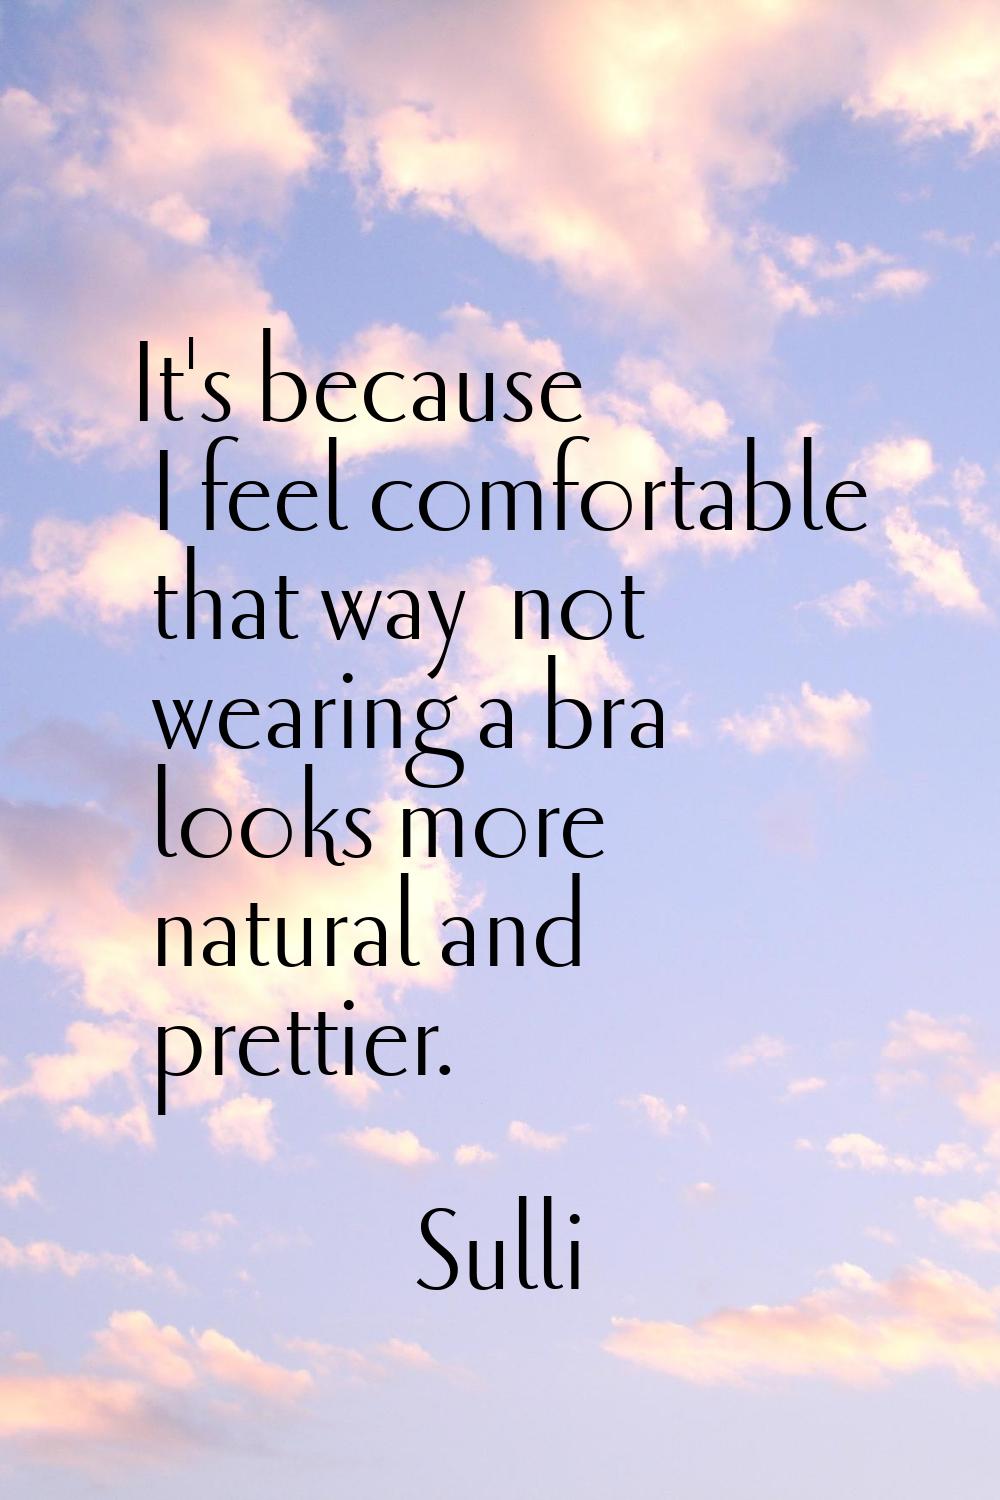 It's because I feel comfortable that way… not wearing a bra looks more natural and prettier.